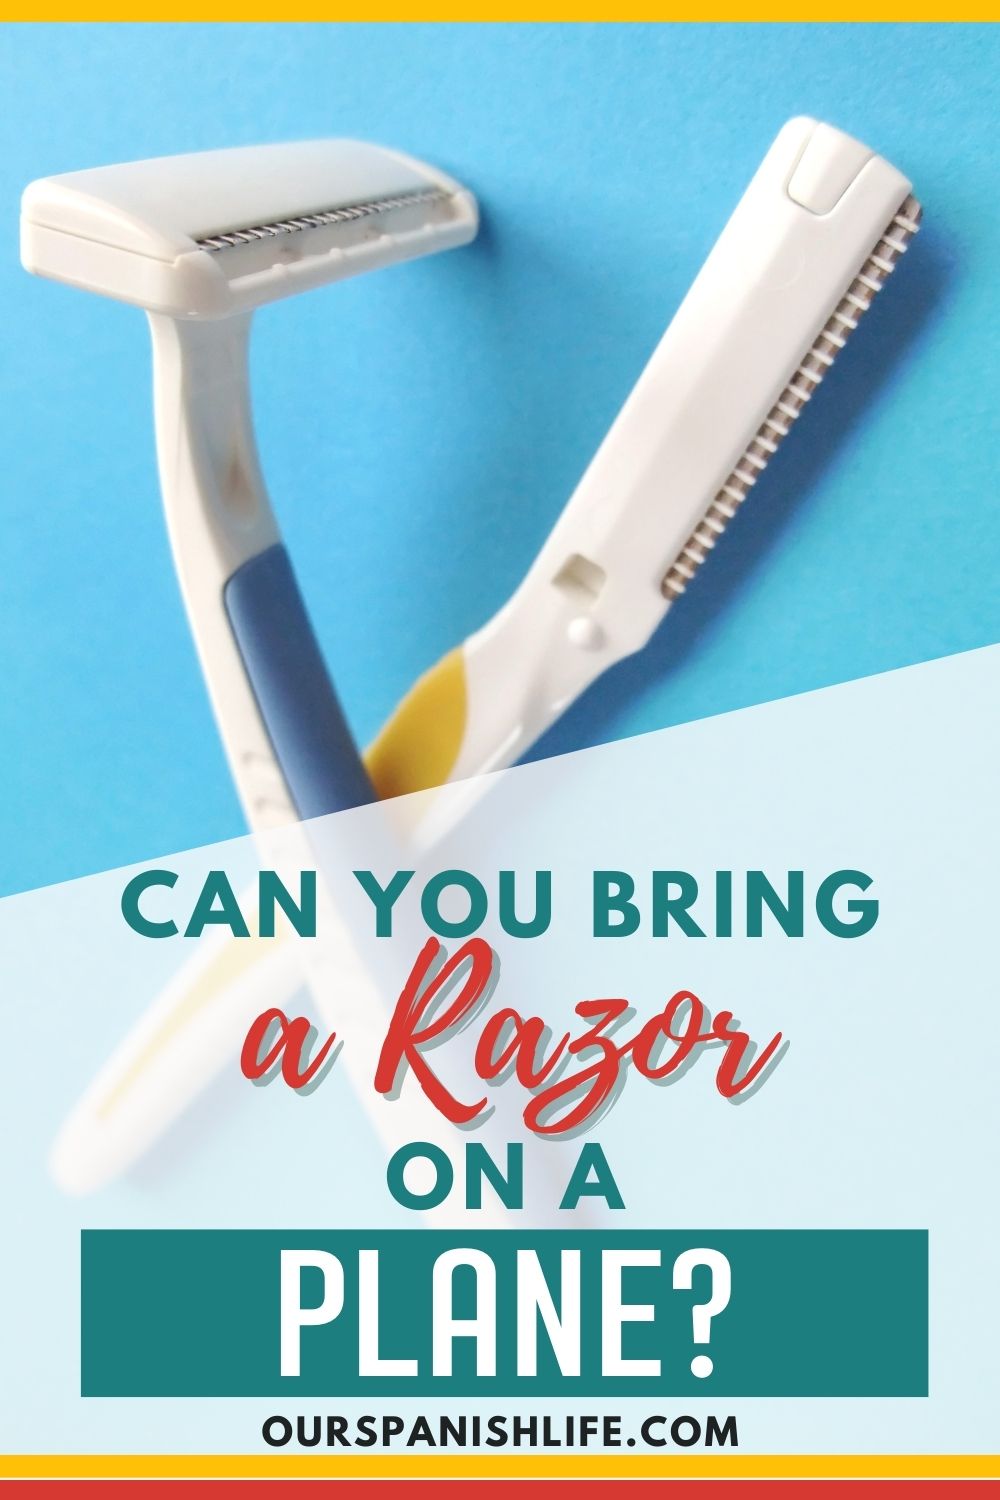 Image of 2 razors in blue background with text overlay the reads Can You Bring a Razor on a Plane